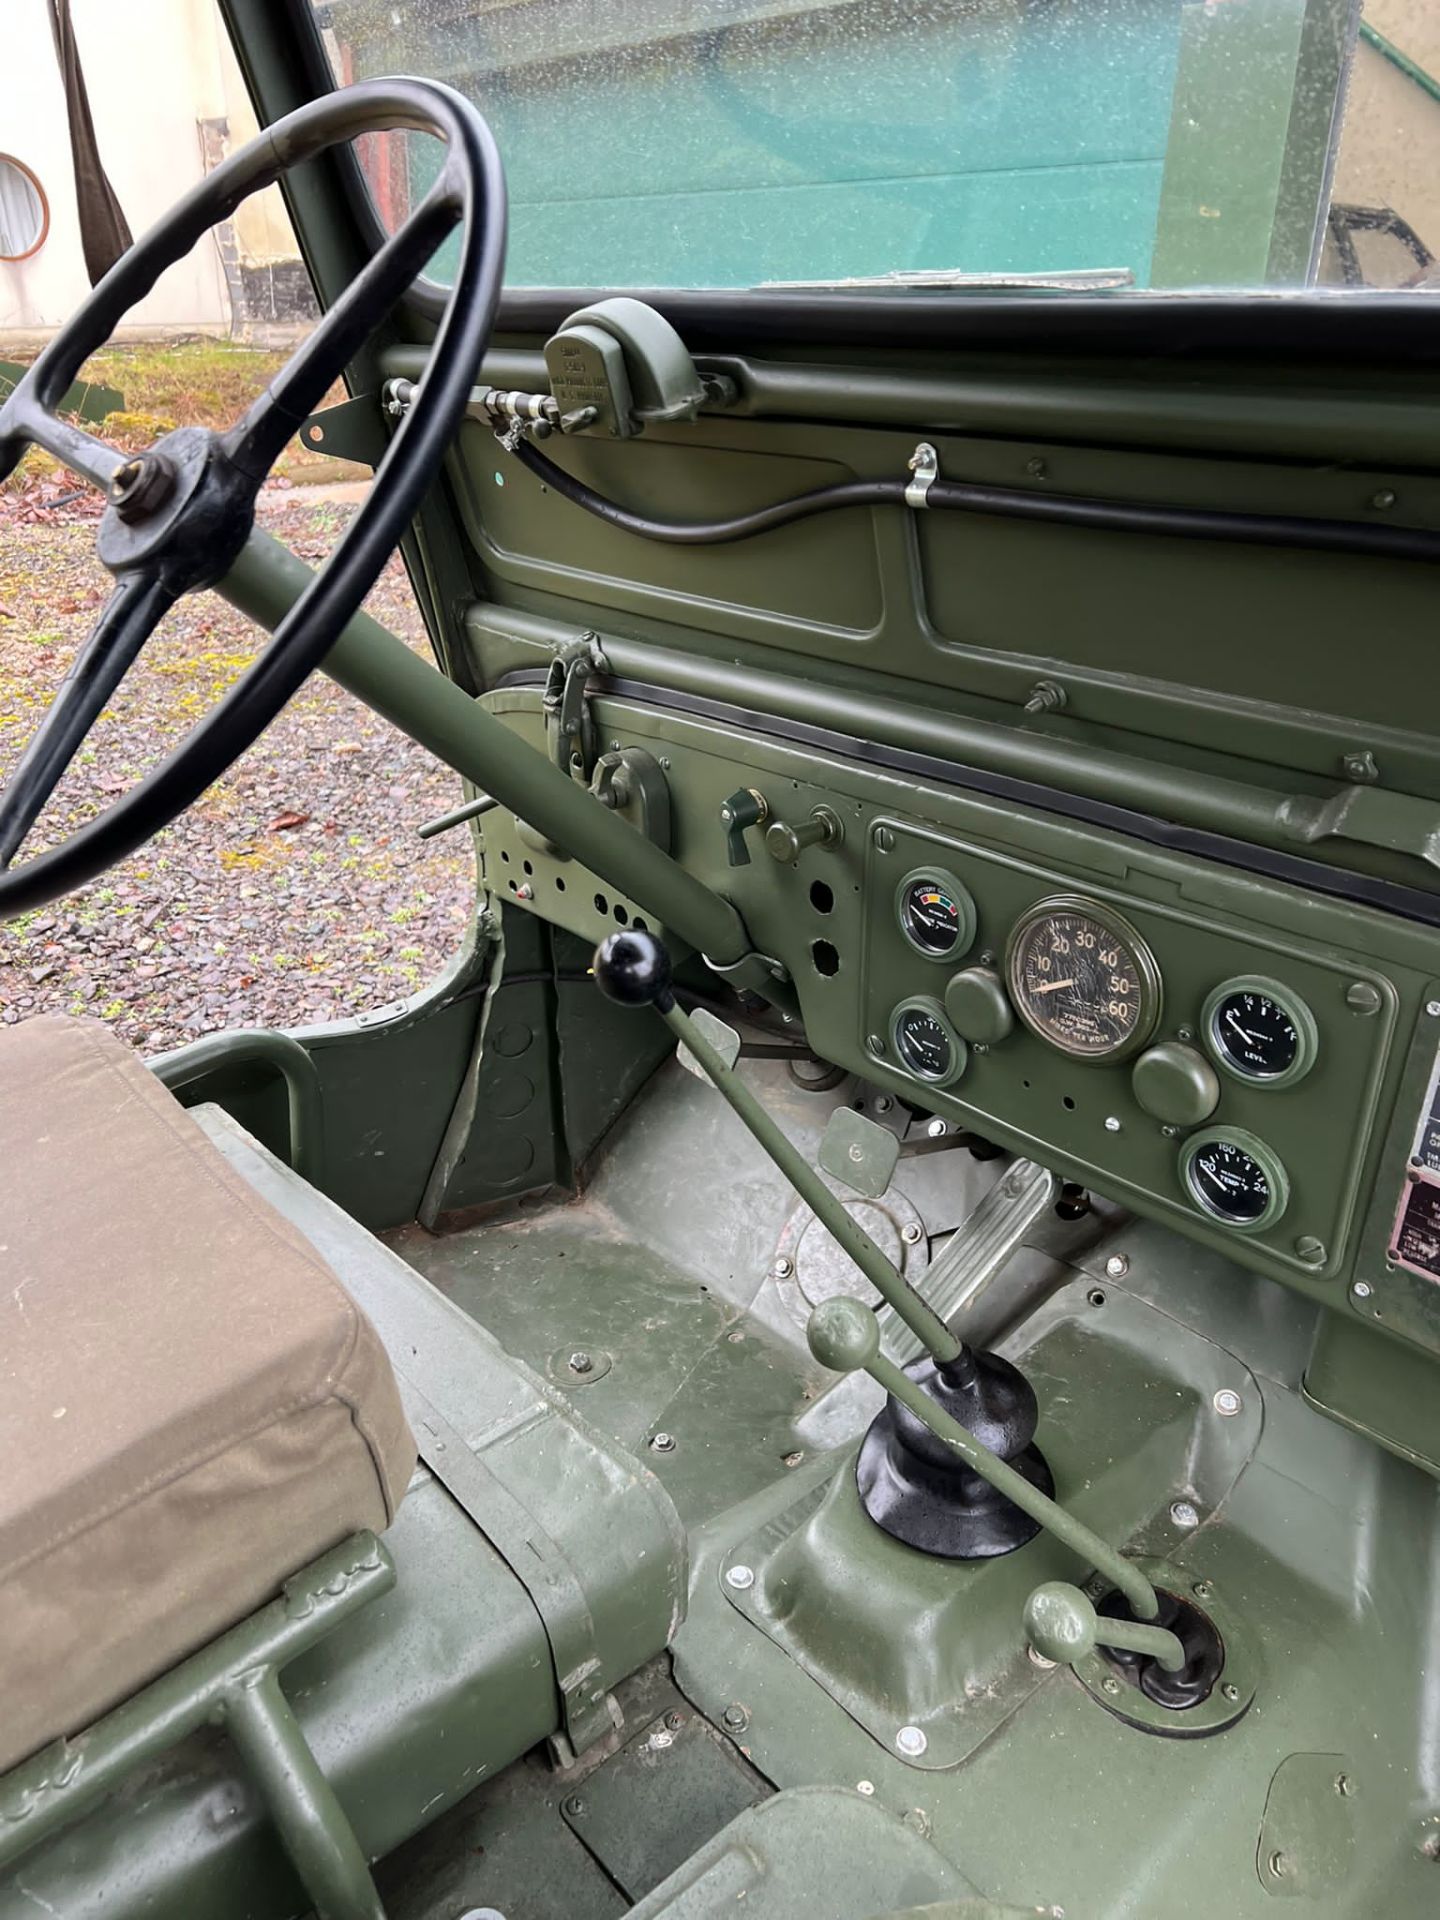 1945 Willys Jeep - Military Vehicle - Restored and raring to go... - Image 11 of 13